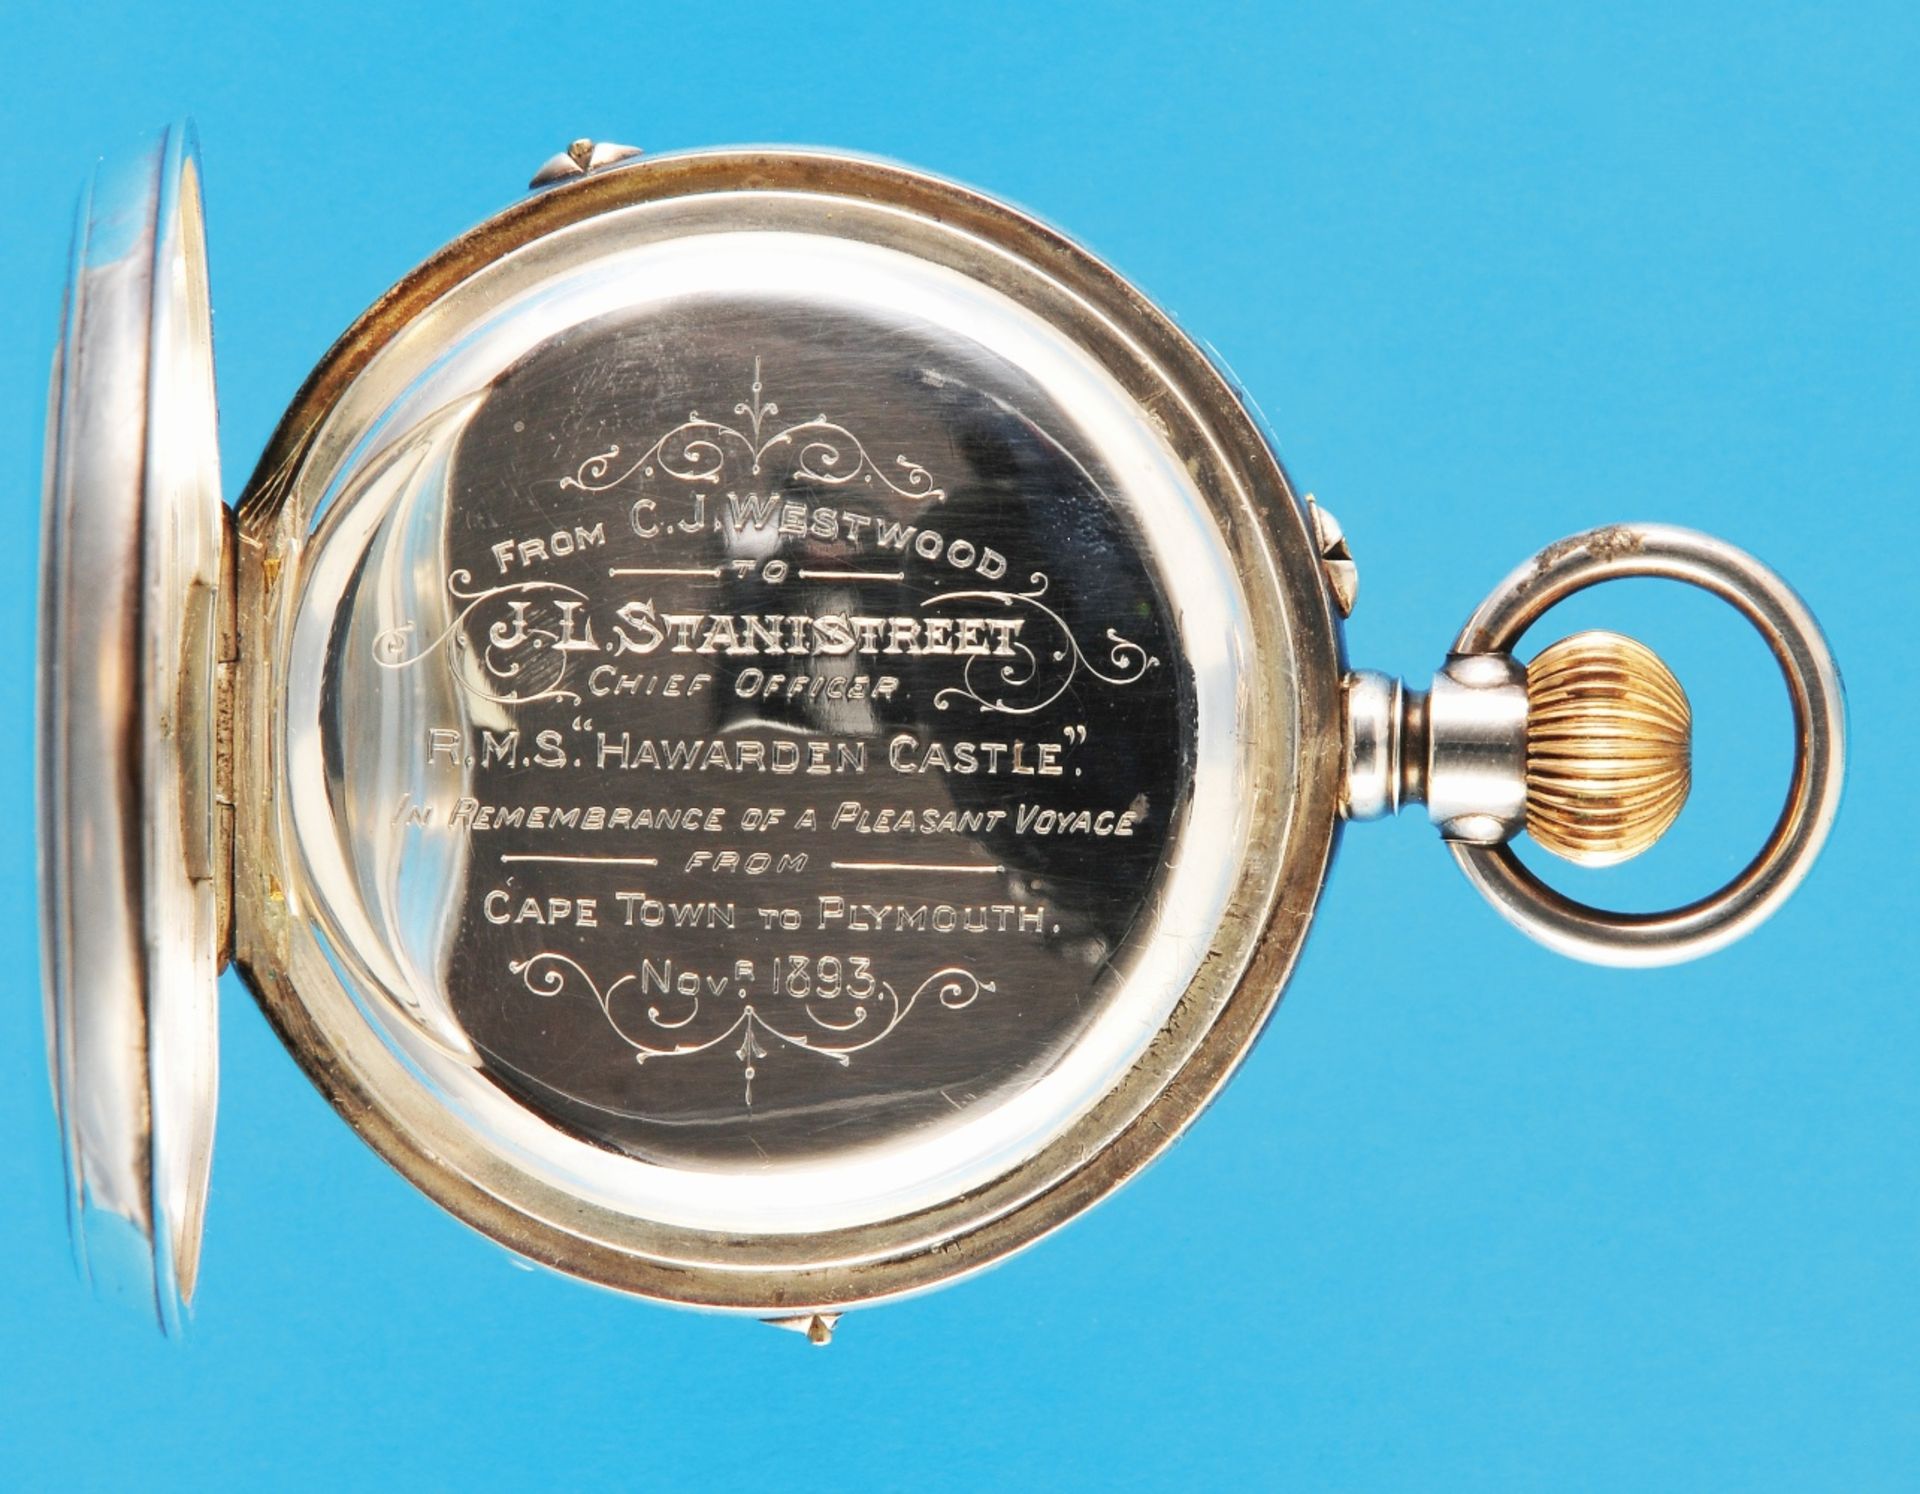 Large silver pocket watch with moon phase calendar, smooth case with monogram L.S., on cuvette dedic